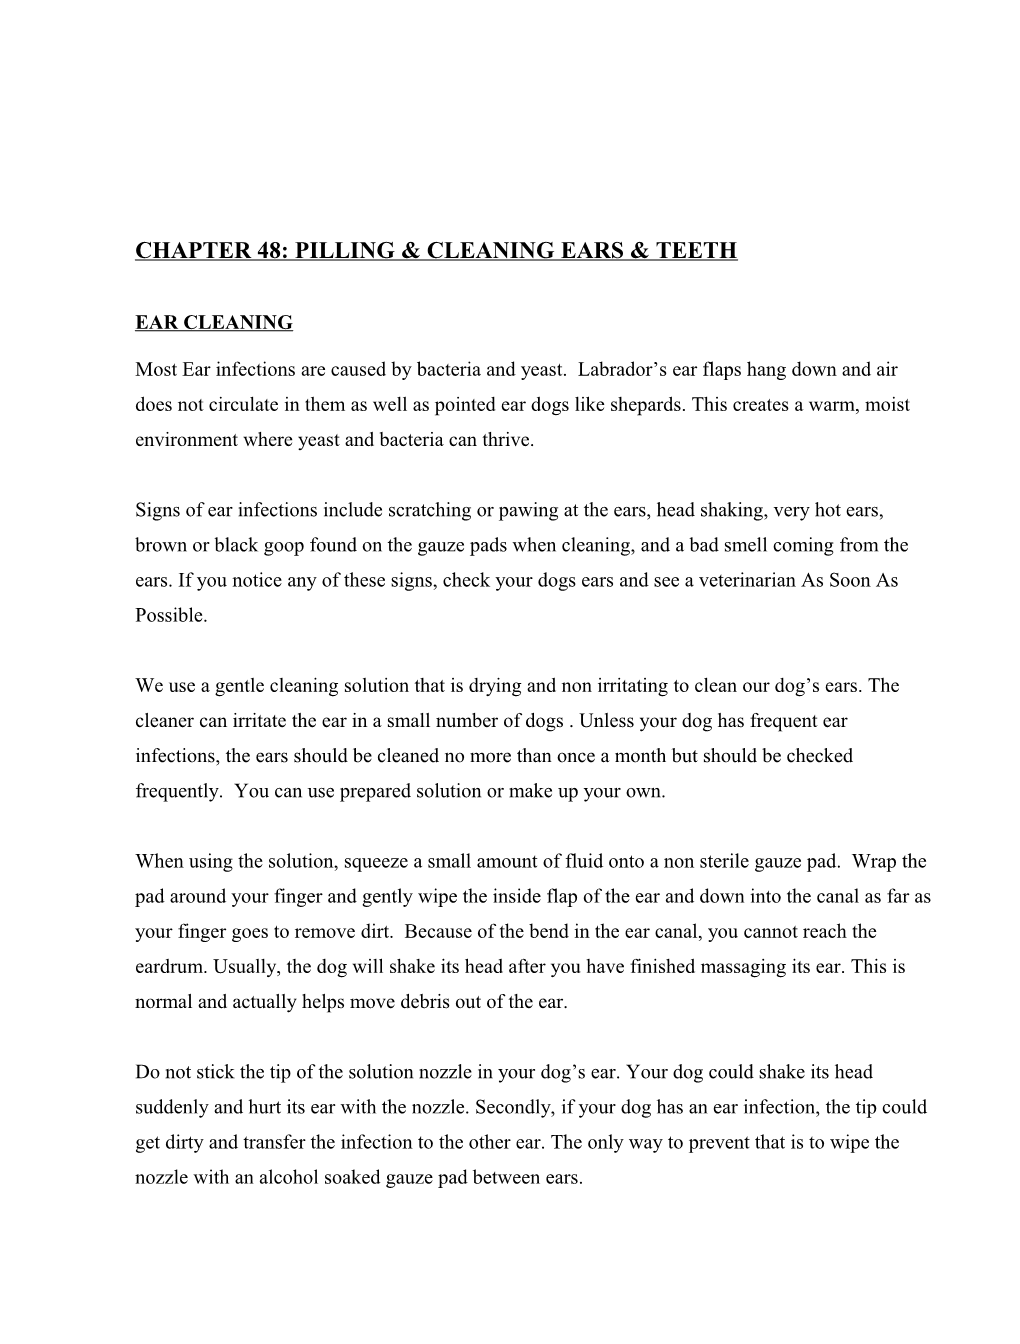 Chapter 48: Pilling & Cleaning Ears & Teeth